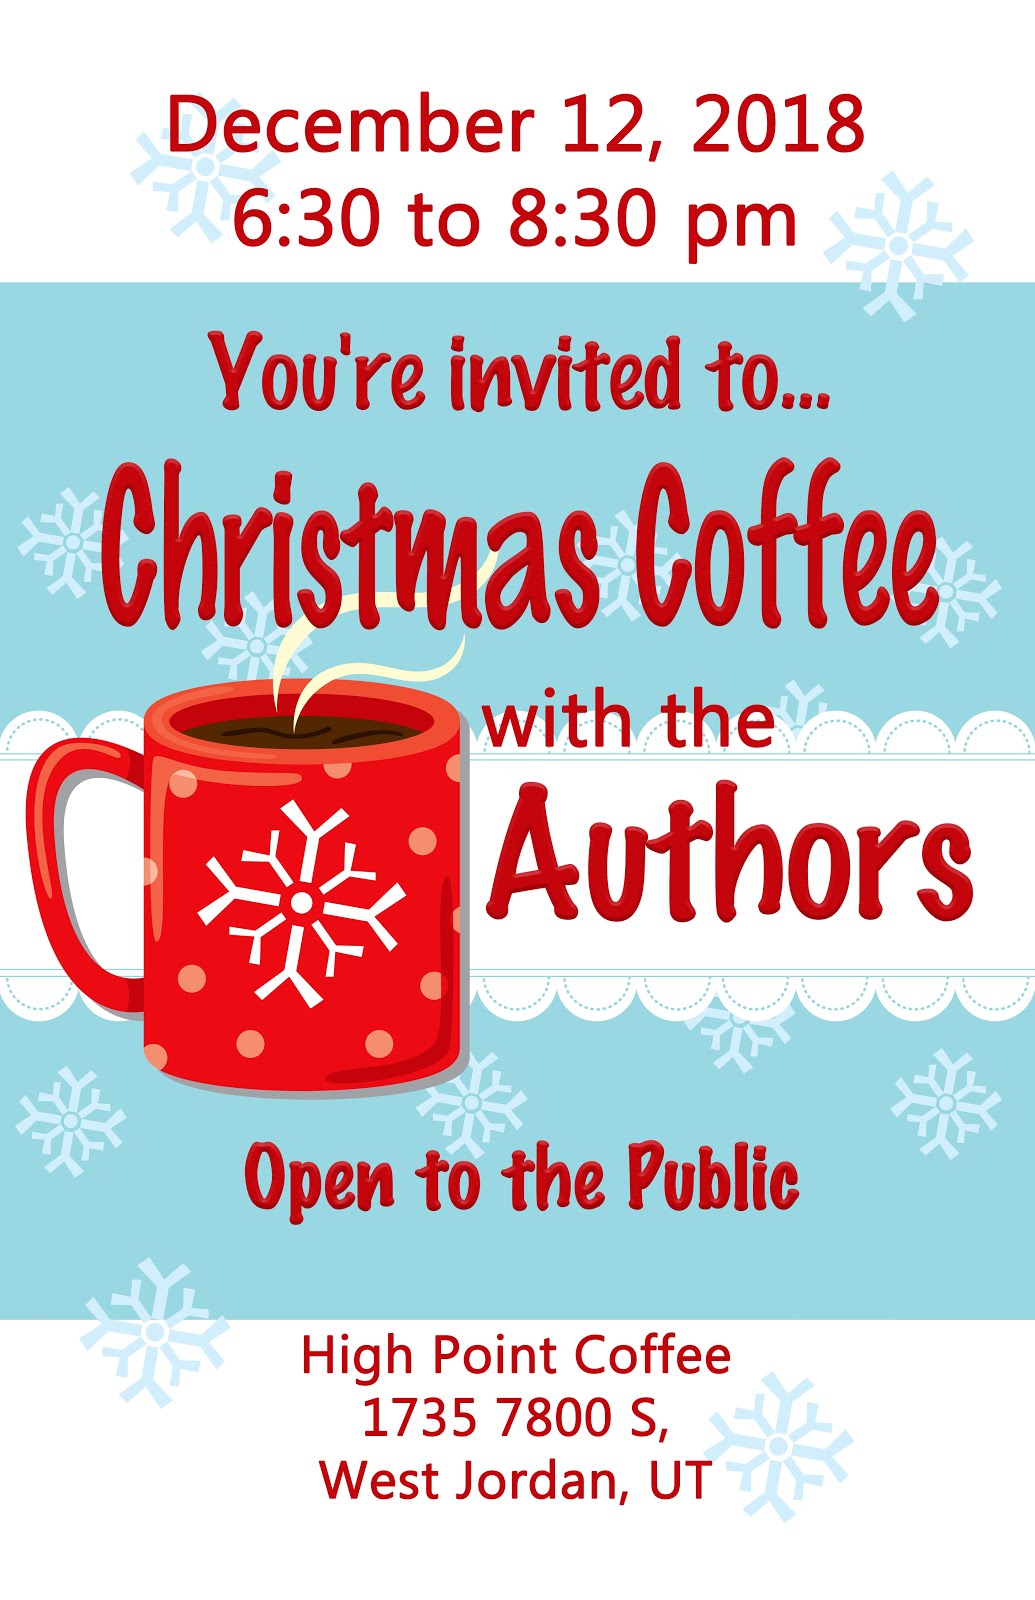 Christmas Coffee with Authors